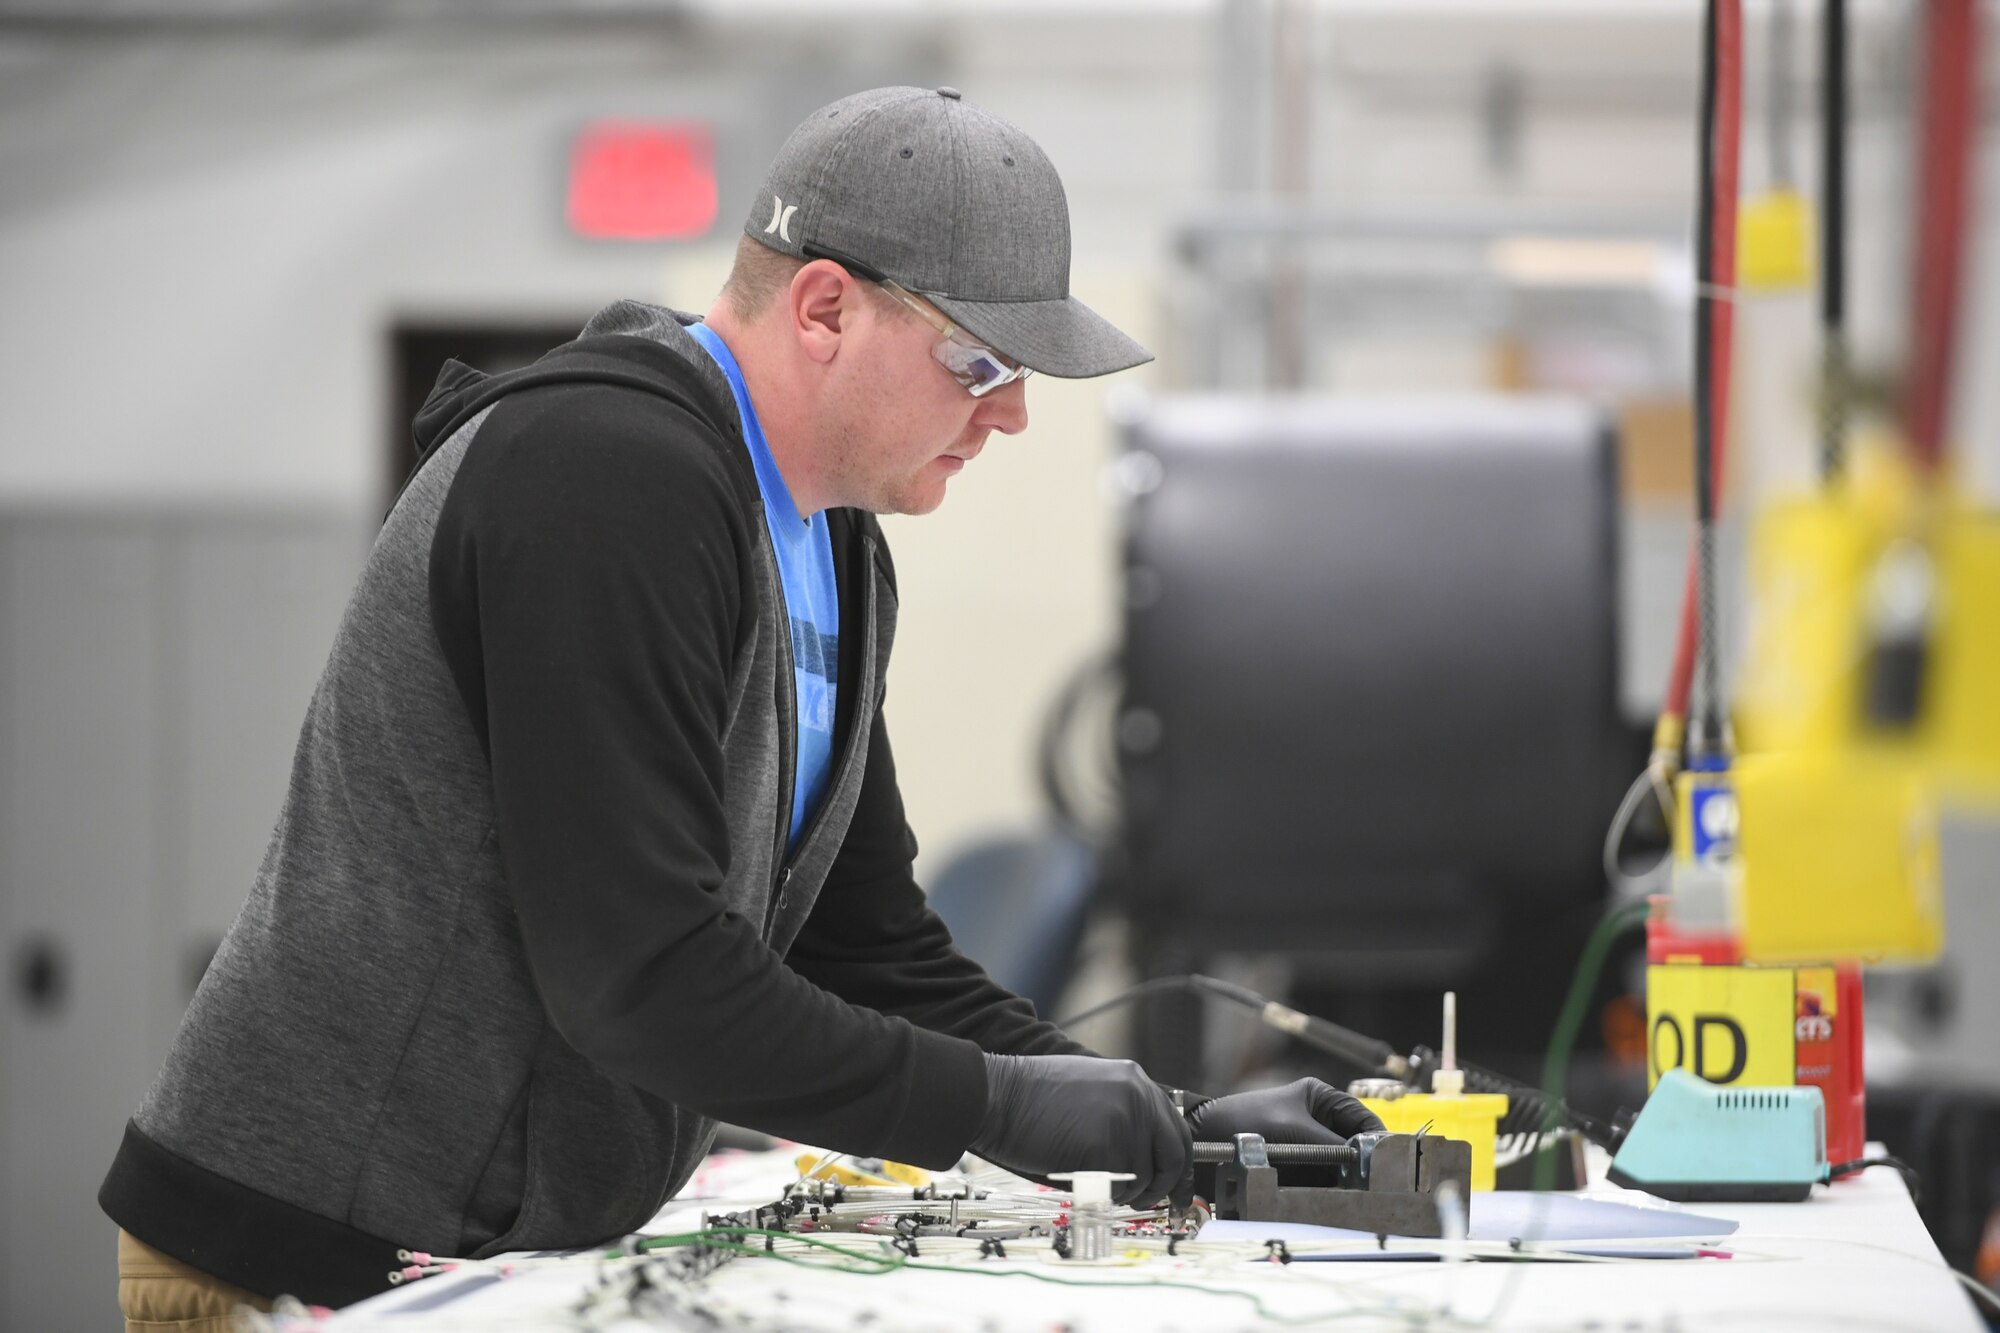 Sean Hamilton, 309th Electronics Maintenance Group, solders a wire harness from the B-809 ground power unit April 29, 2020, at Hill Air Force Base, Utah. The 309th EMXG in the Ogden Air Logistics Complex provides repair and overhaul for exchangeable assets for a multitude of systems on a wide assortment of Air Force weapons systems including fighter aircraft, intercontinental ballistic missiles, powered aerospace ground equipment, tactical shelters, as well as refurbishment of radomes worldwide. (U.S. Air Force photo by Cynthia Griggs)